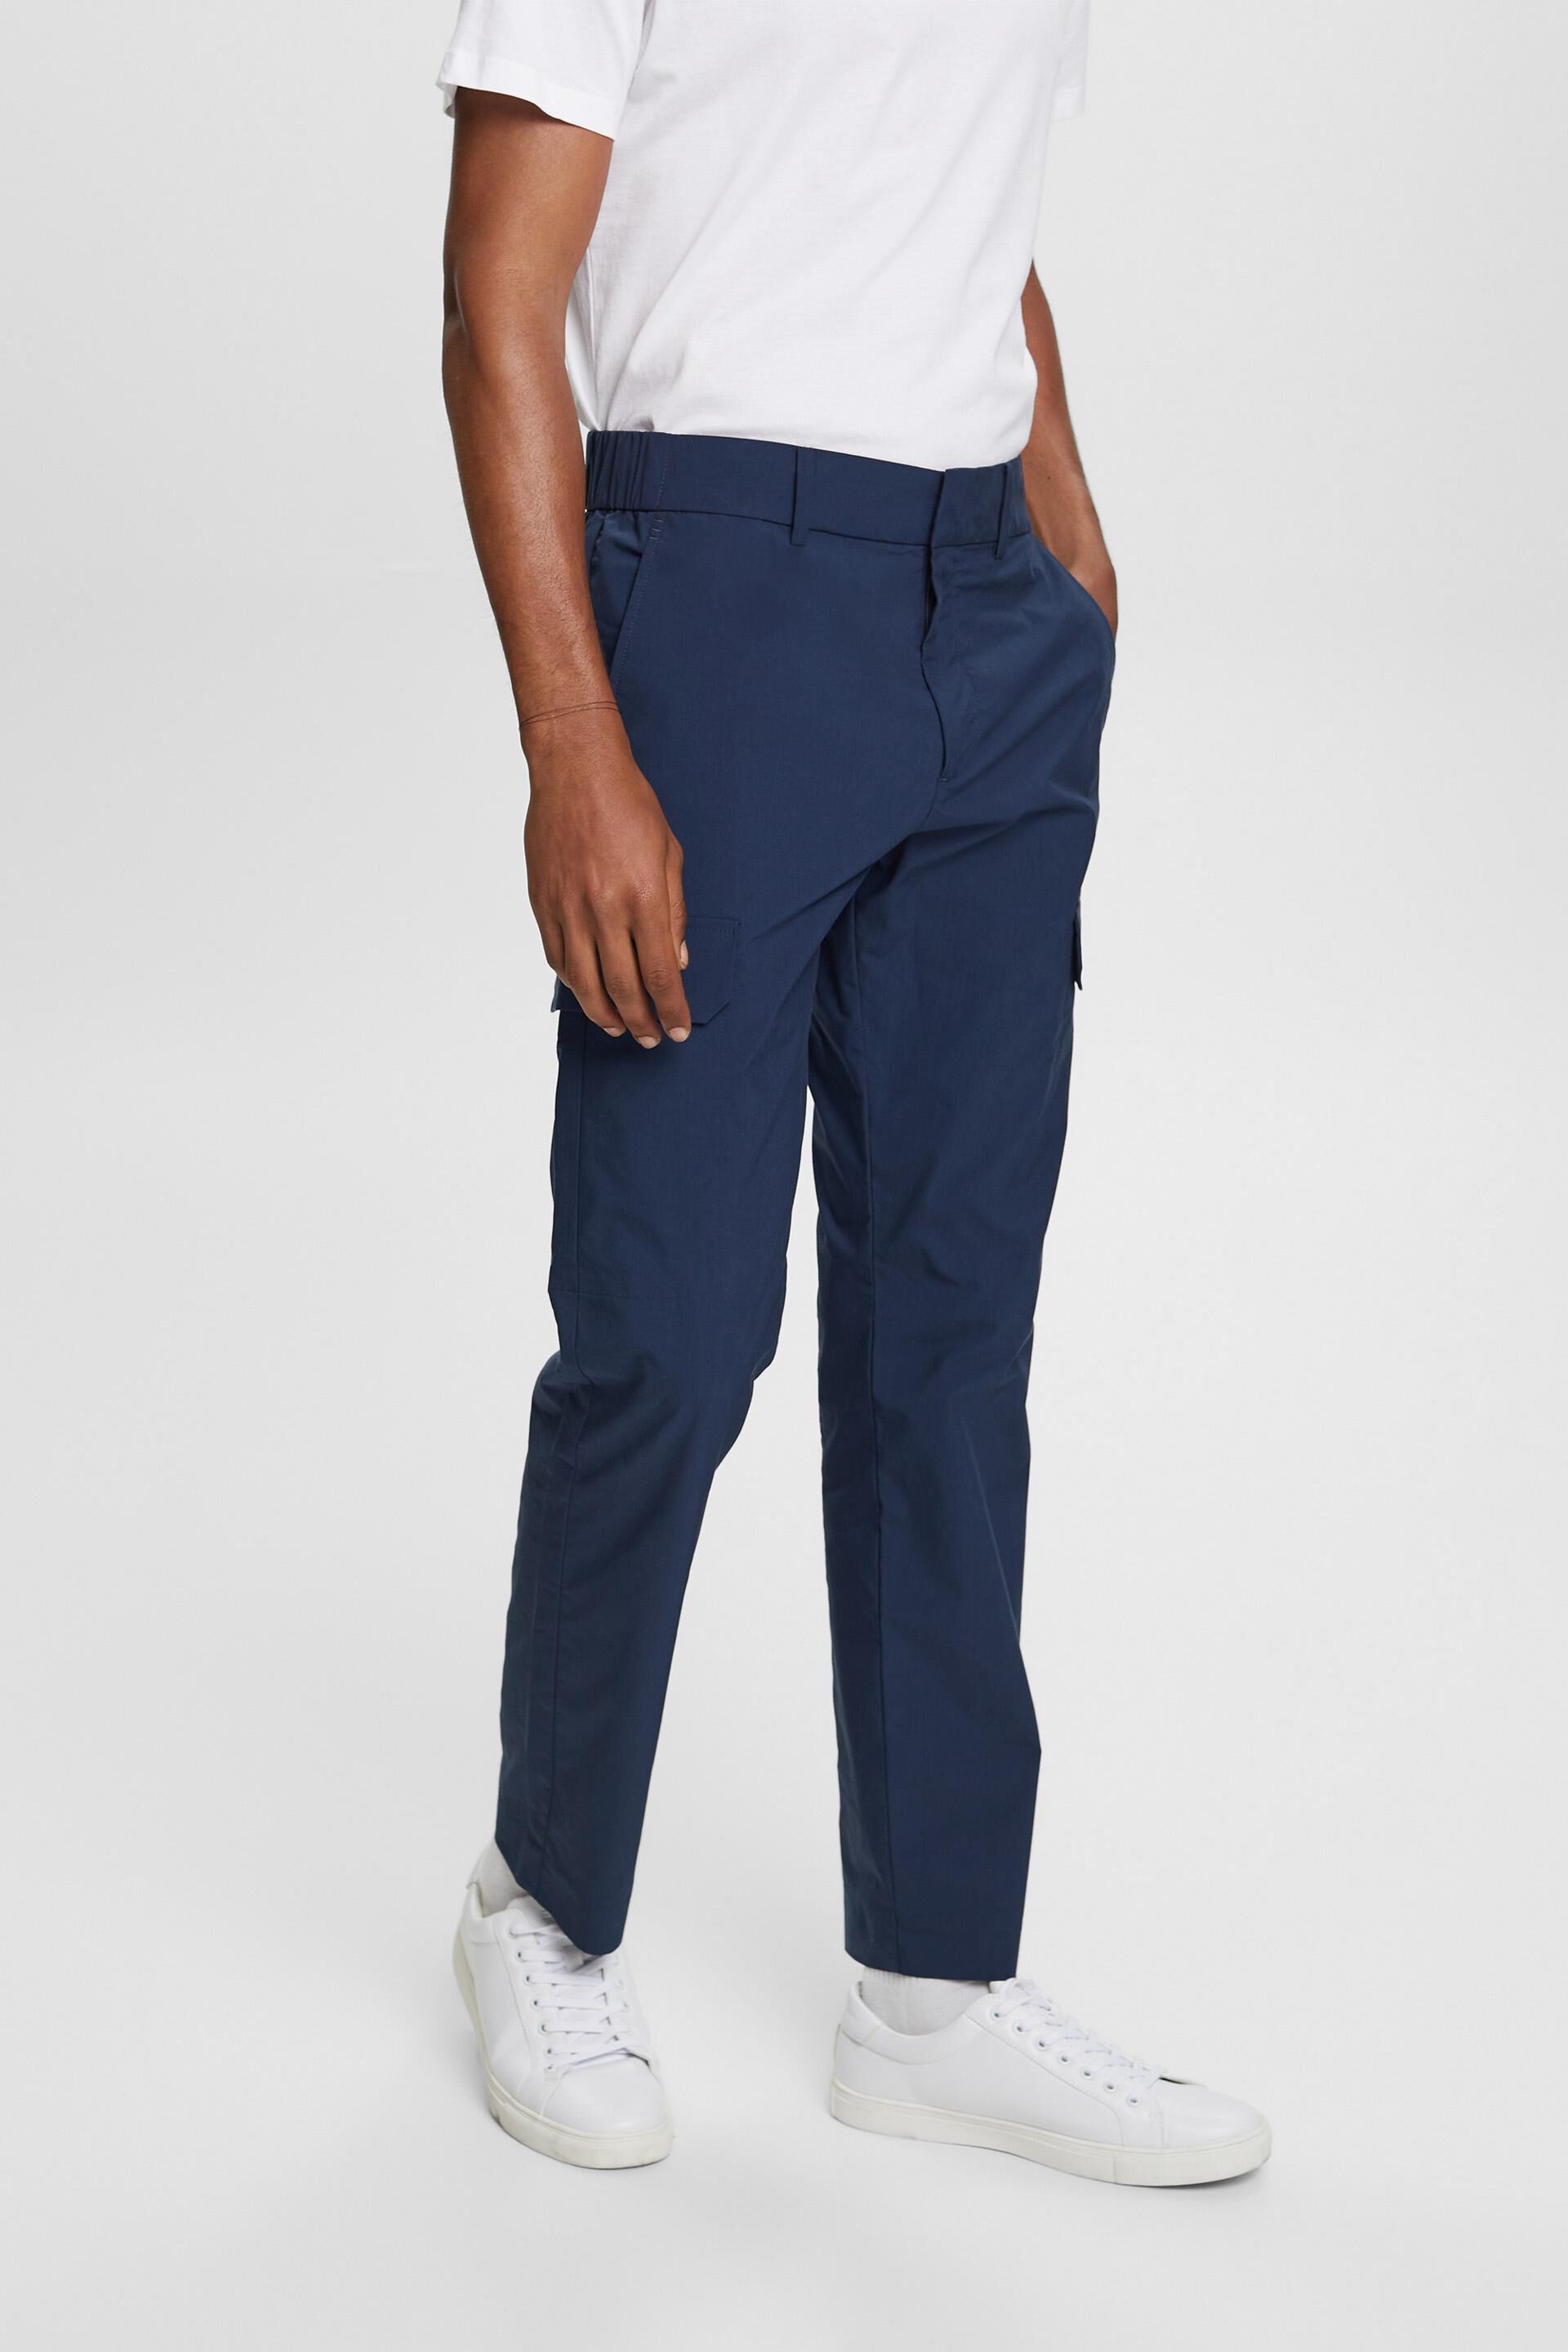 Men Baggy Cargo|men's Cargo Pants - Casual Cotton Trousers With  Multi-pockets & Drawstring